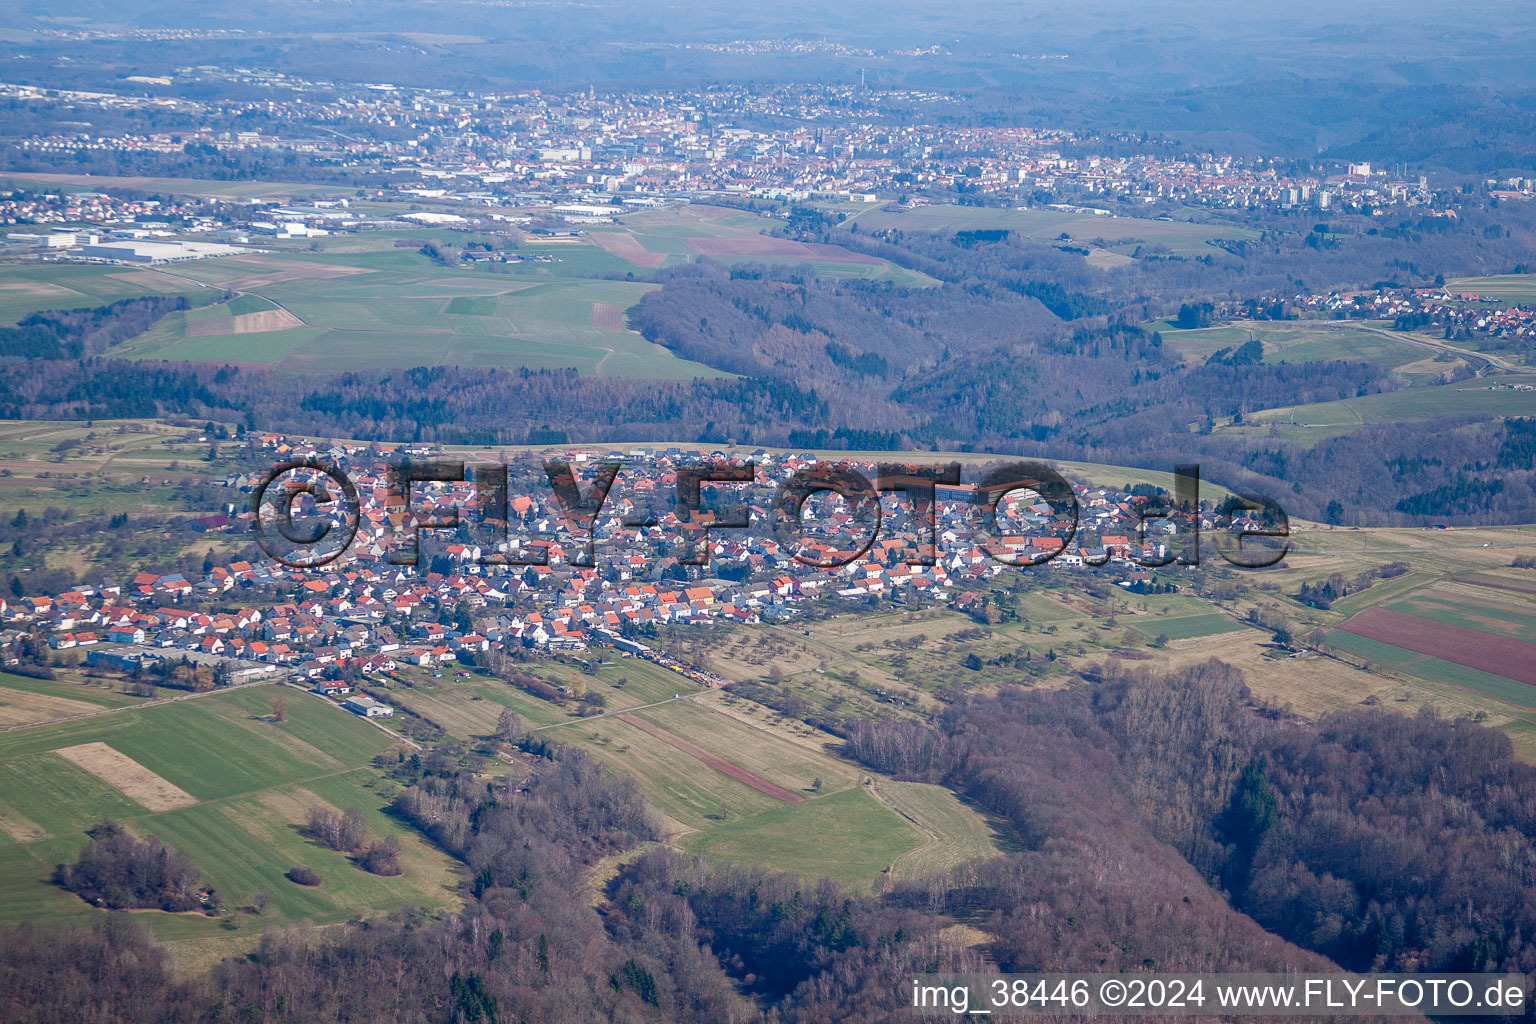 Village - view on the edge of agricultural fields and farmland in Vinningen in the state Rhineland-Palatinate, Germany